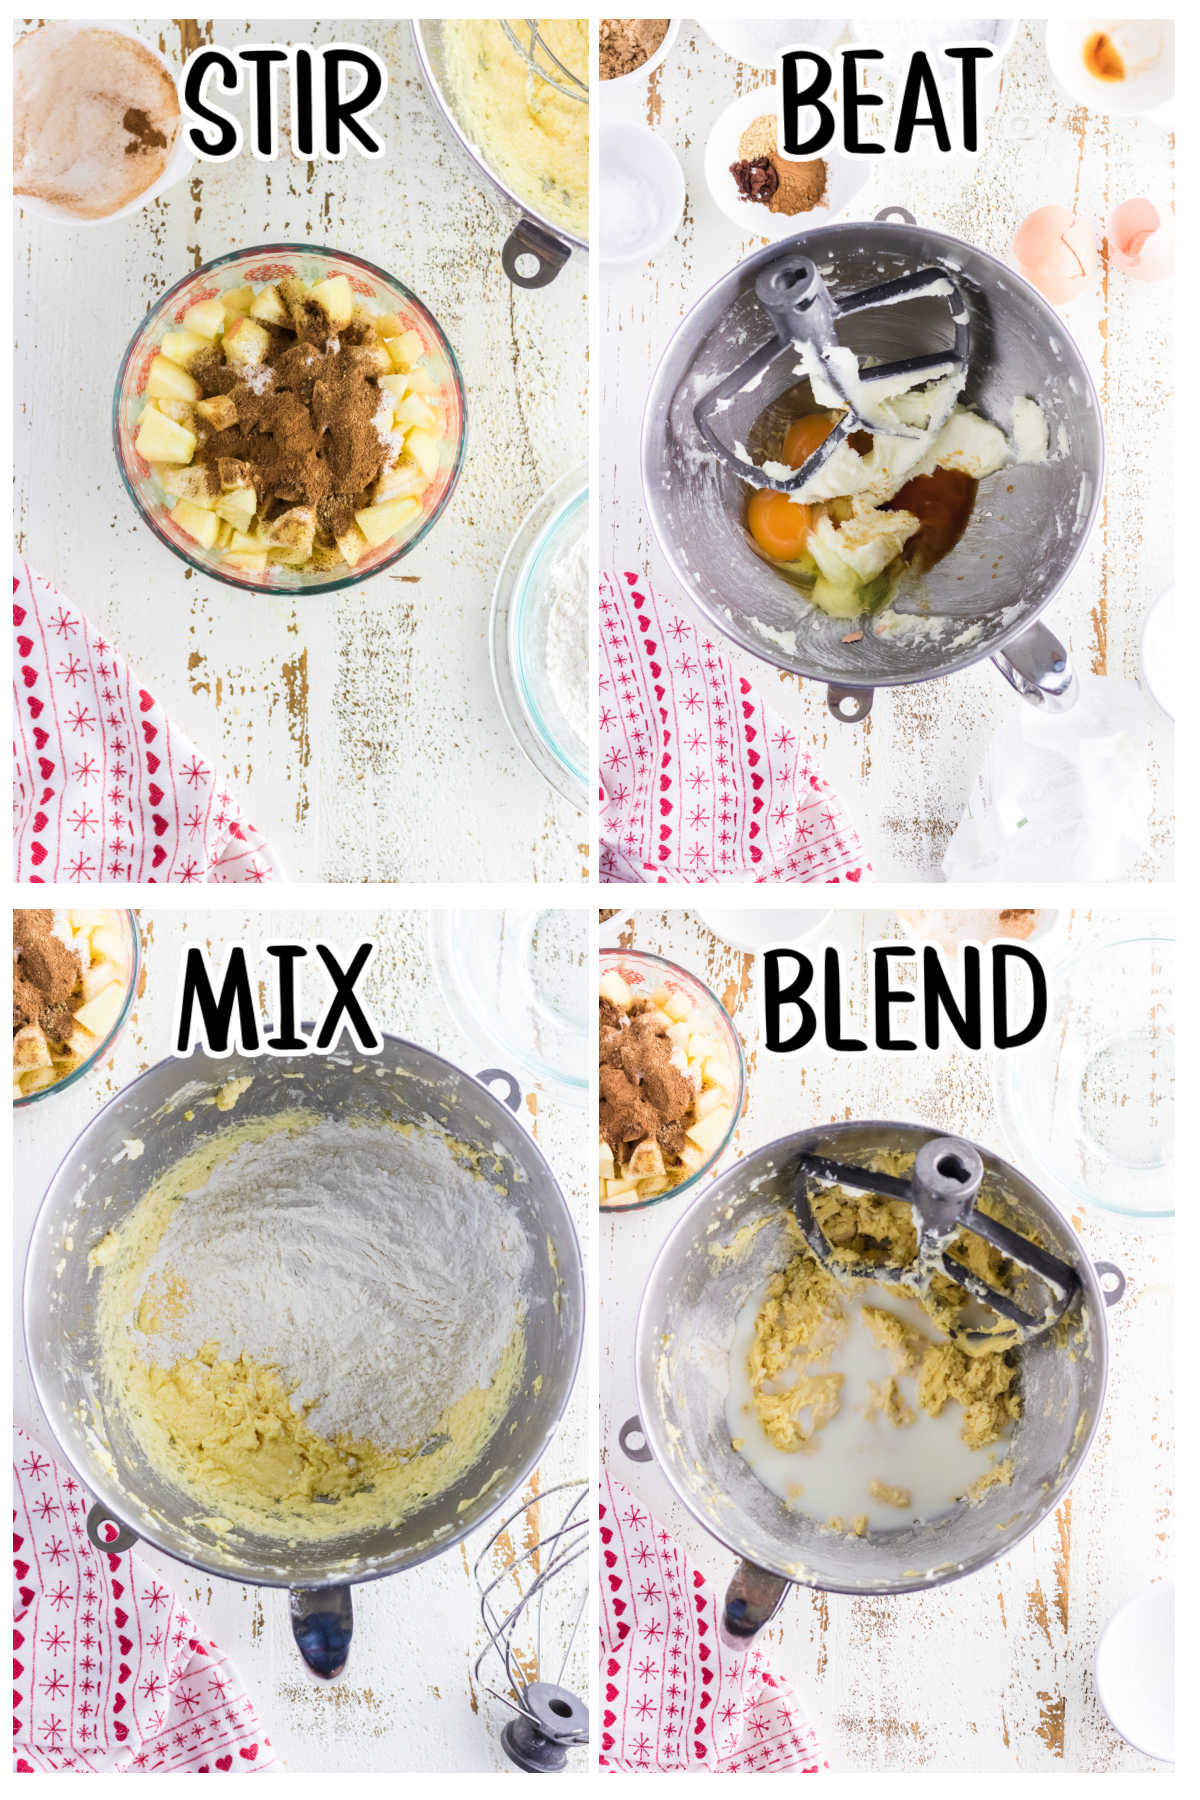 Step by step images showing how to mix the. batter for apple bread.